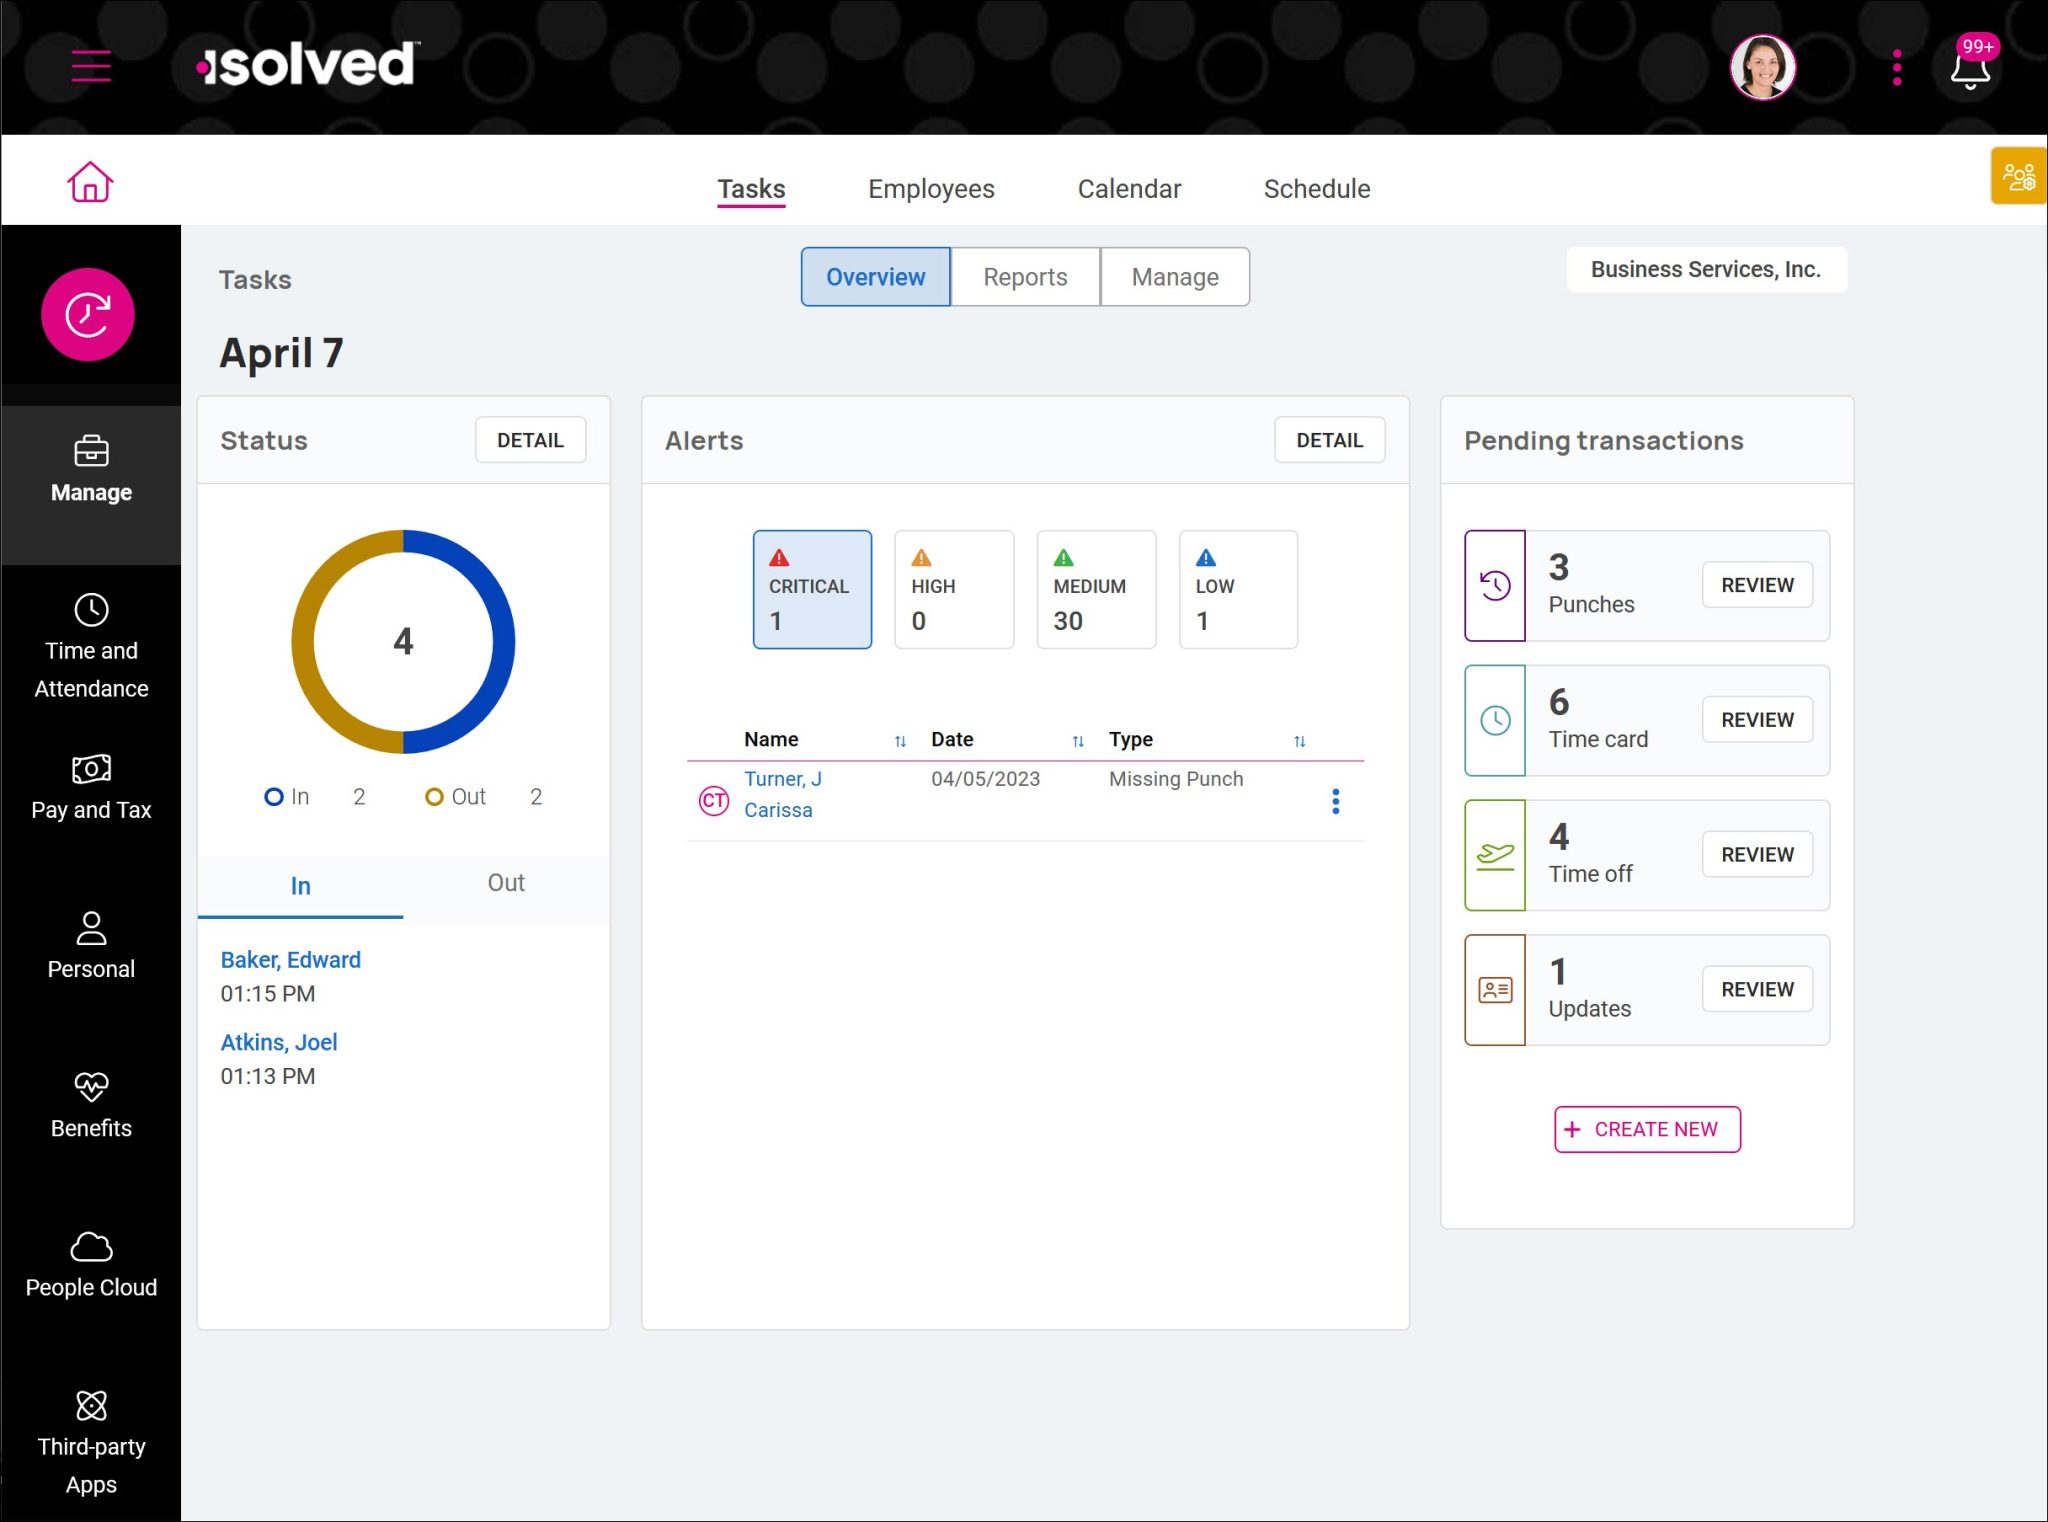 Screenshot showing overview of Manager / Supervisor Tasks in the Adaptive Employee Experience